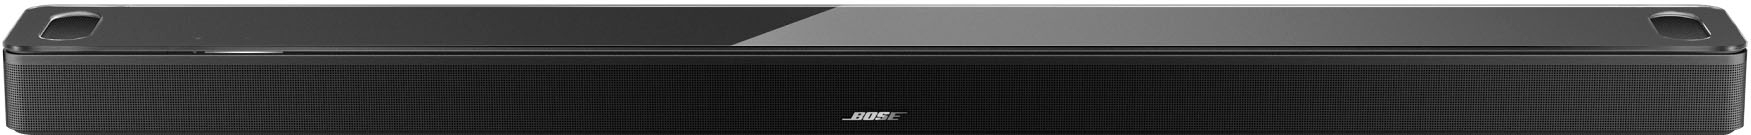 Black Bose Buy Soundbar Smart and 882963-1100 Dolby Assistant Atmos - Best Ultra with Voice